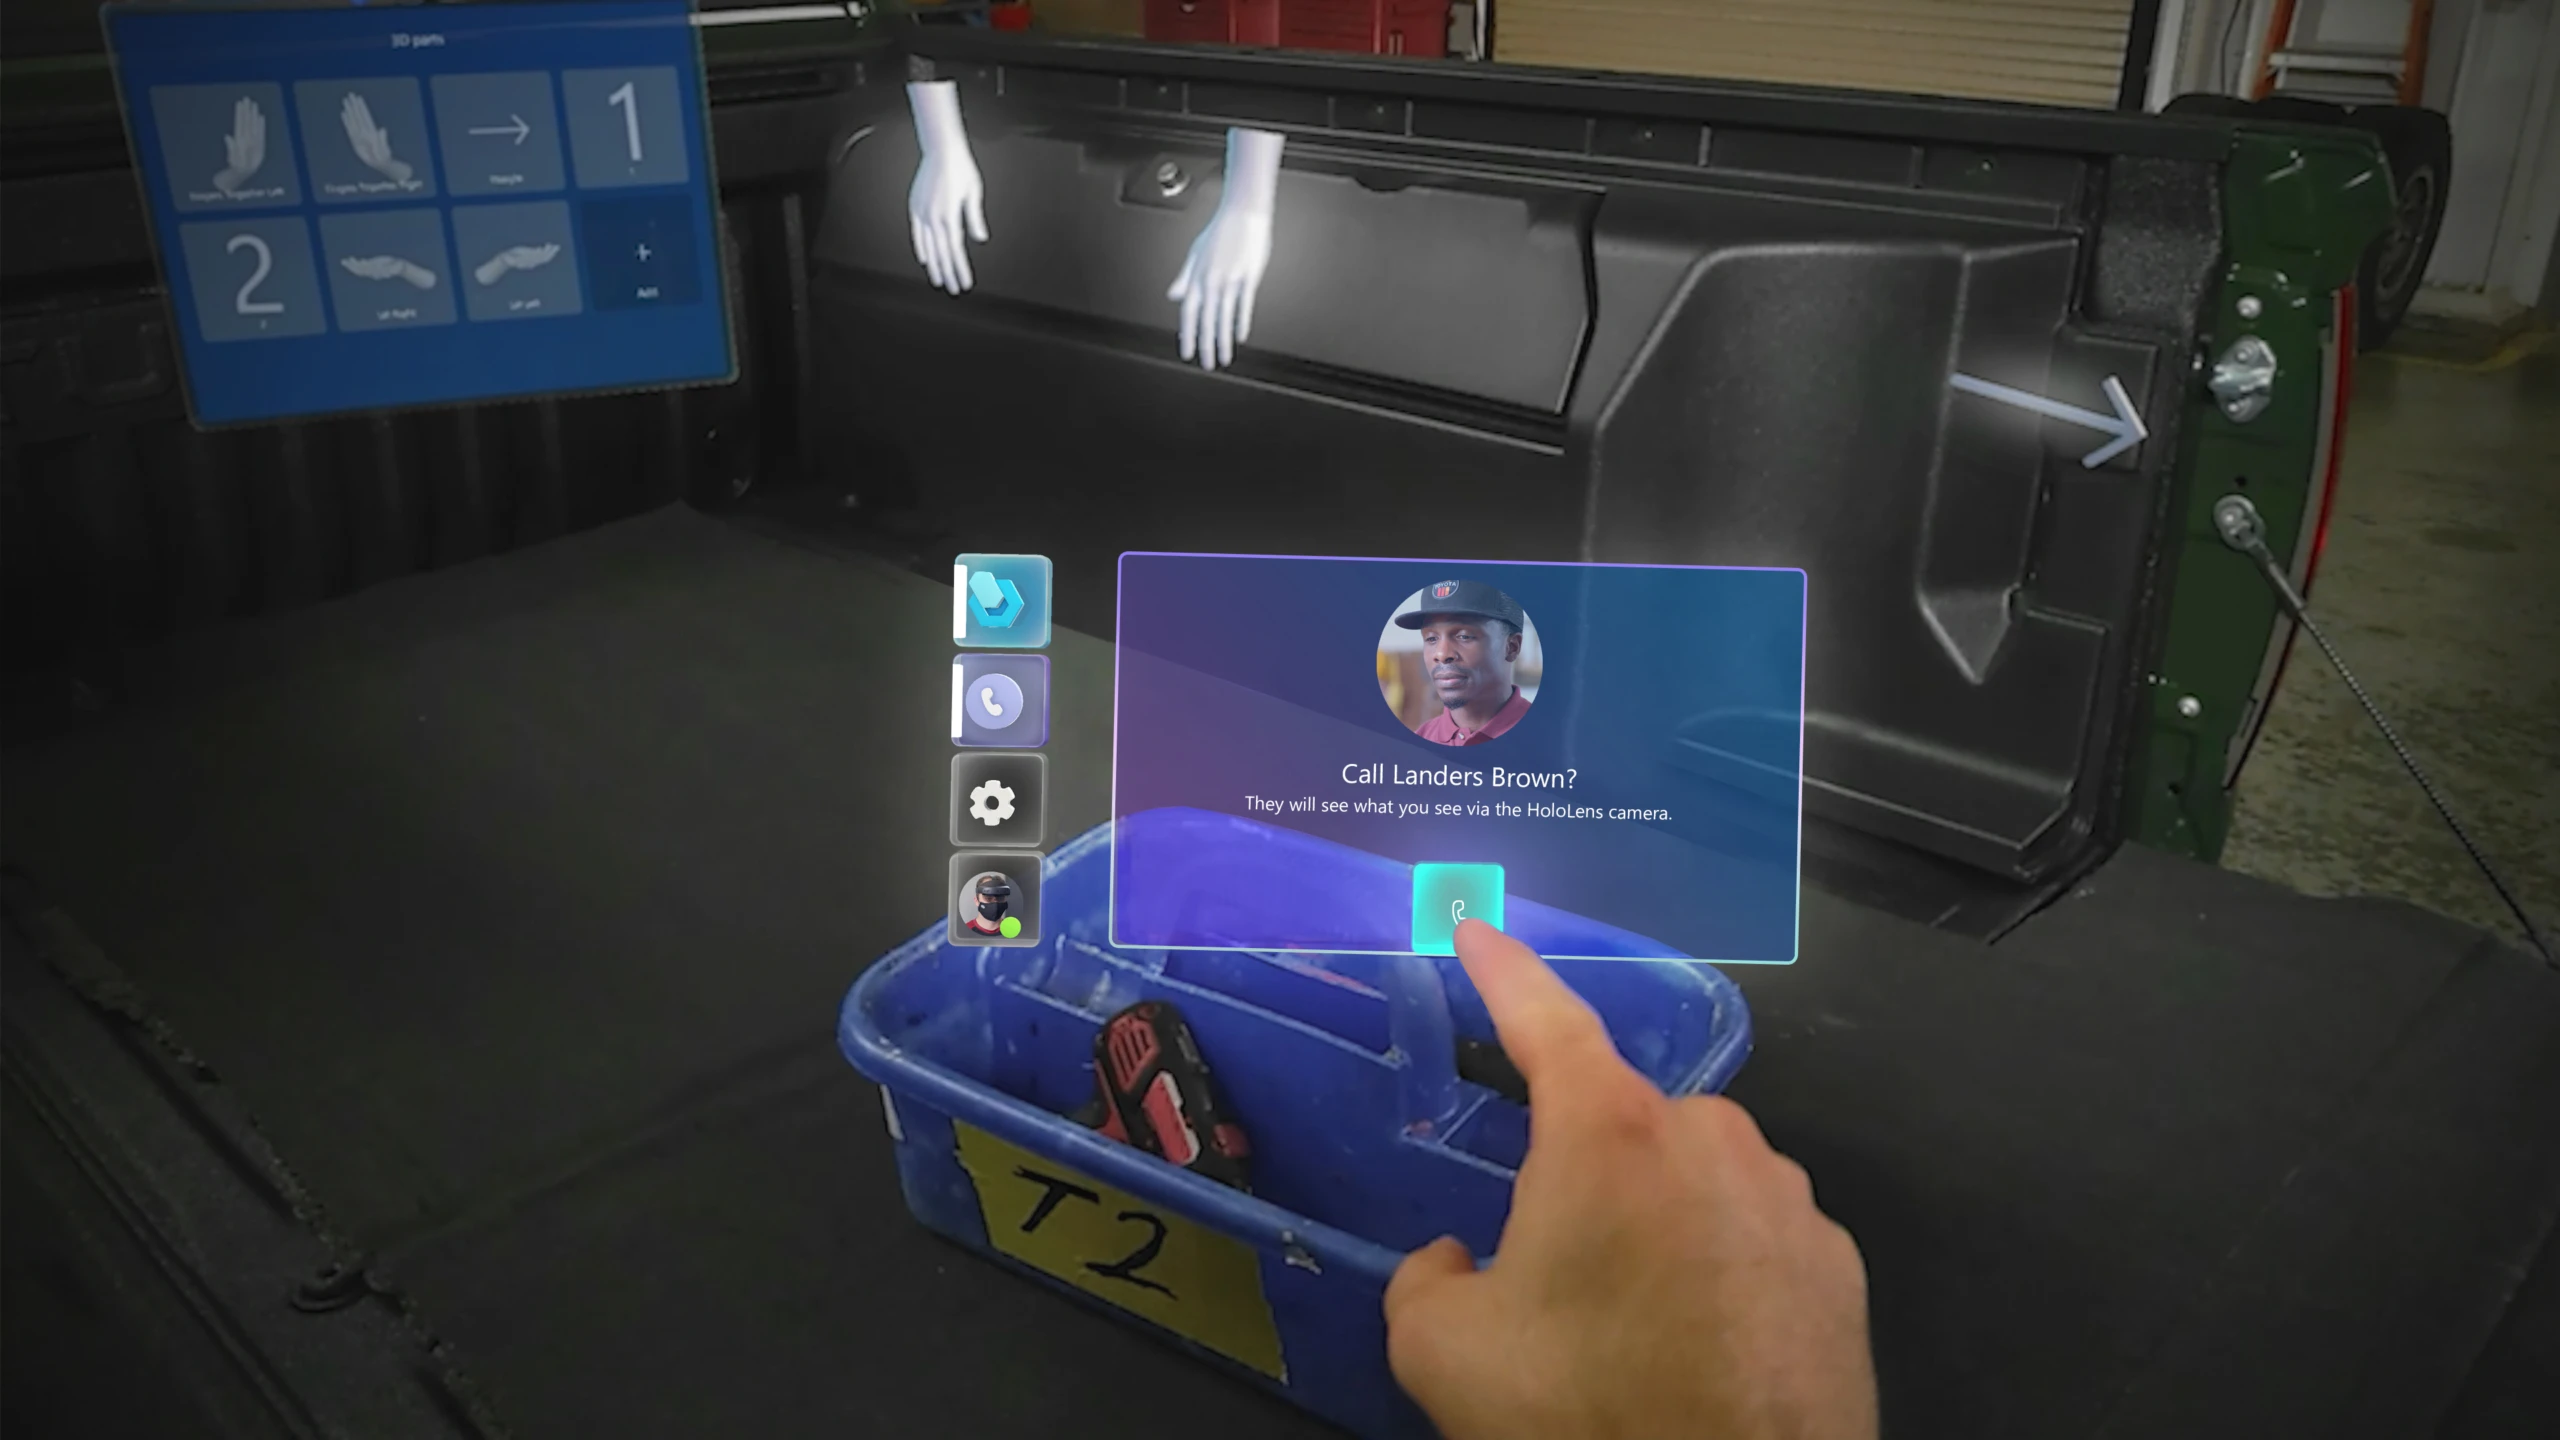 A user's mixed reality view from their HoloLens, showing their hand using touch controls for starting a holographic video call with a remote colleague.